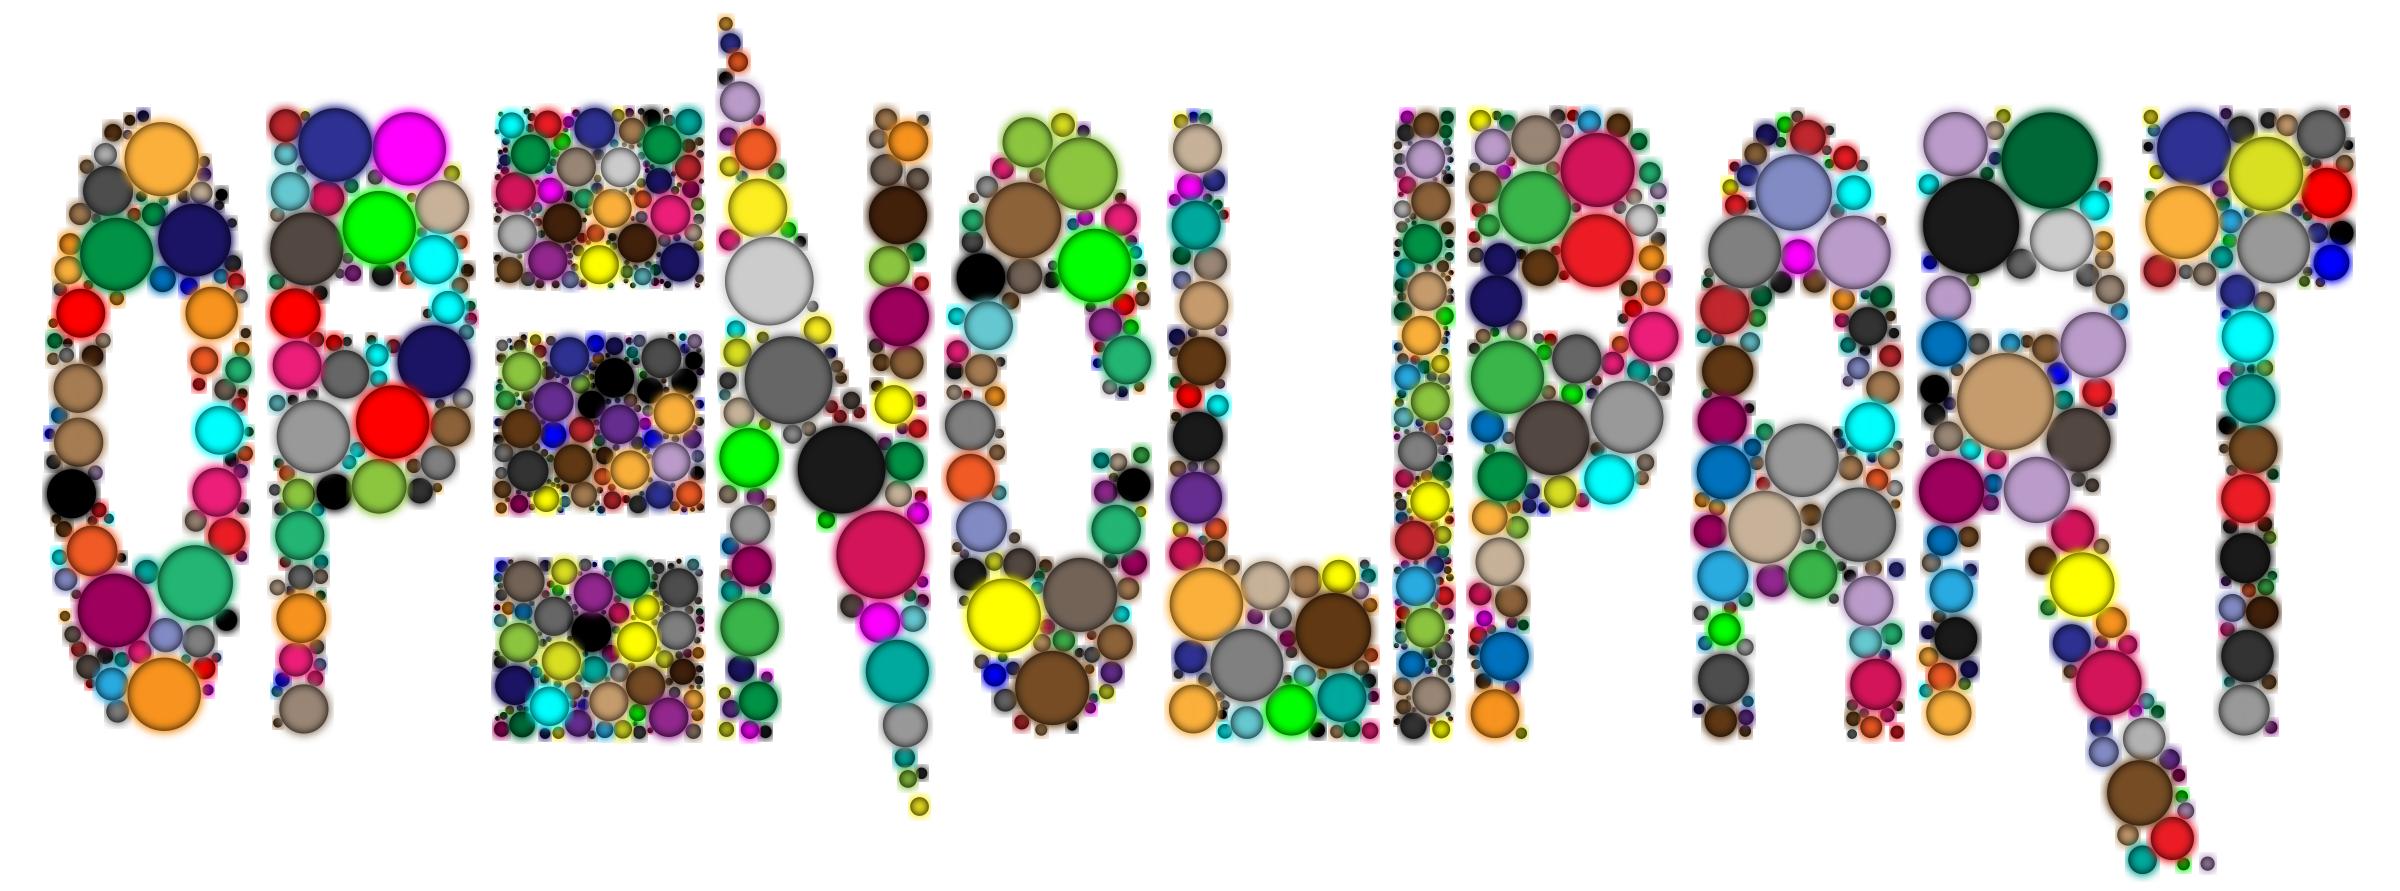 OpenClipart Typography Logo Technicolor 60's Edition png